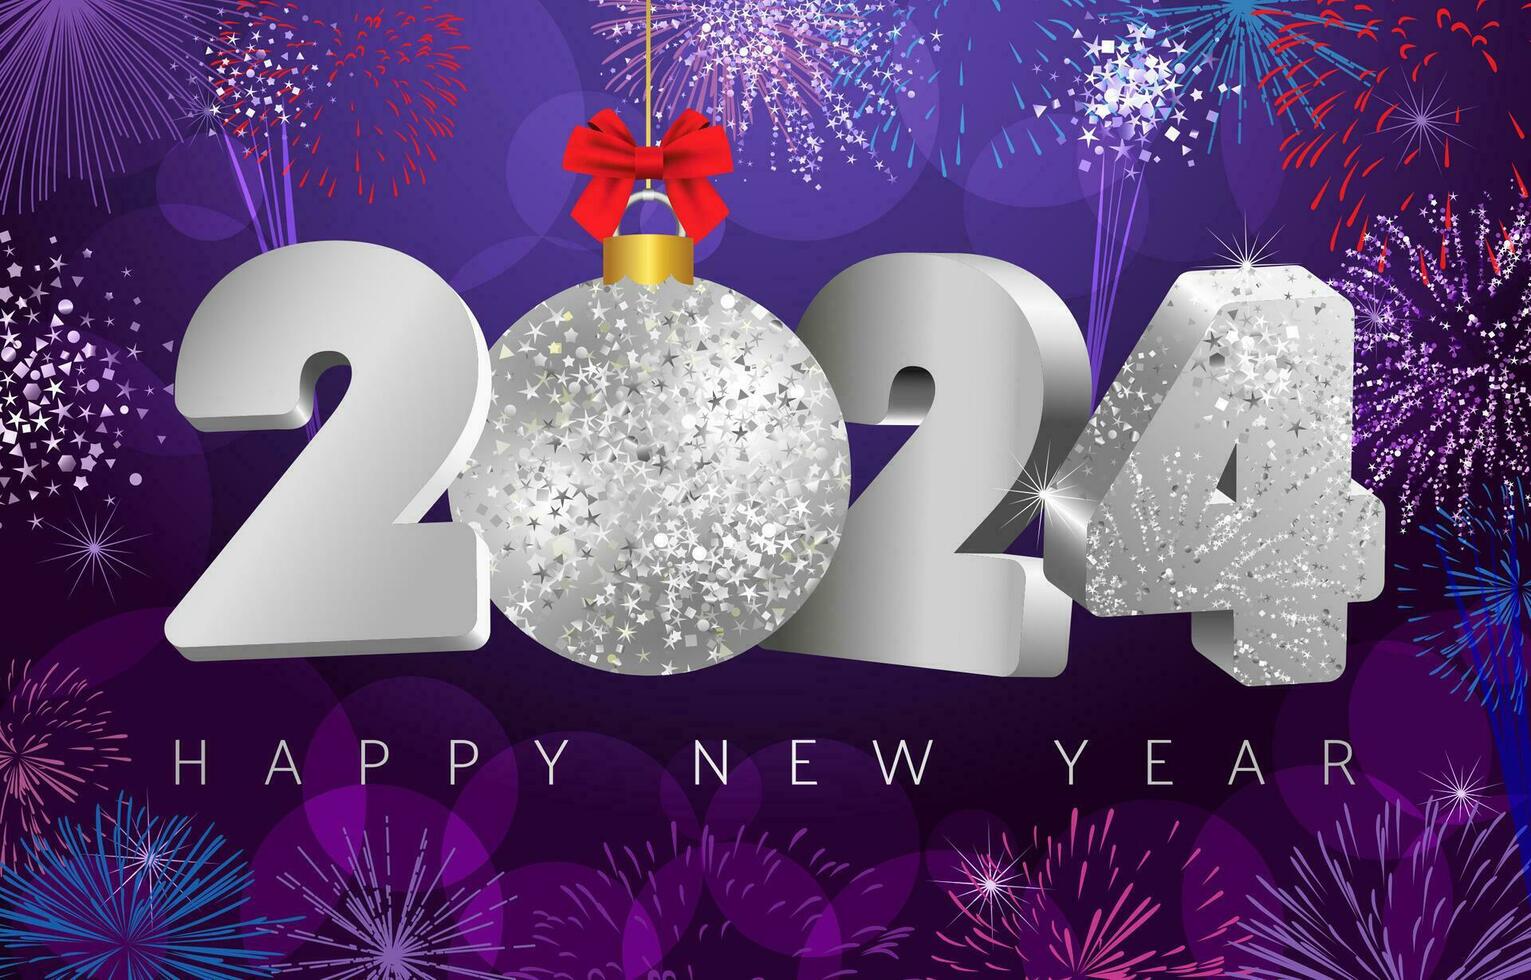 2024 A Happy New Year holiday poster. Shiny background, creative number 20 24 with Christmas ball. Fireworks and glitters vector